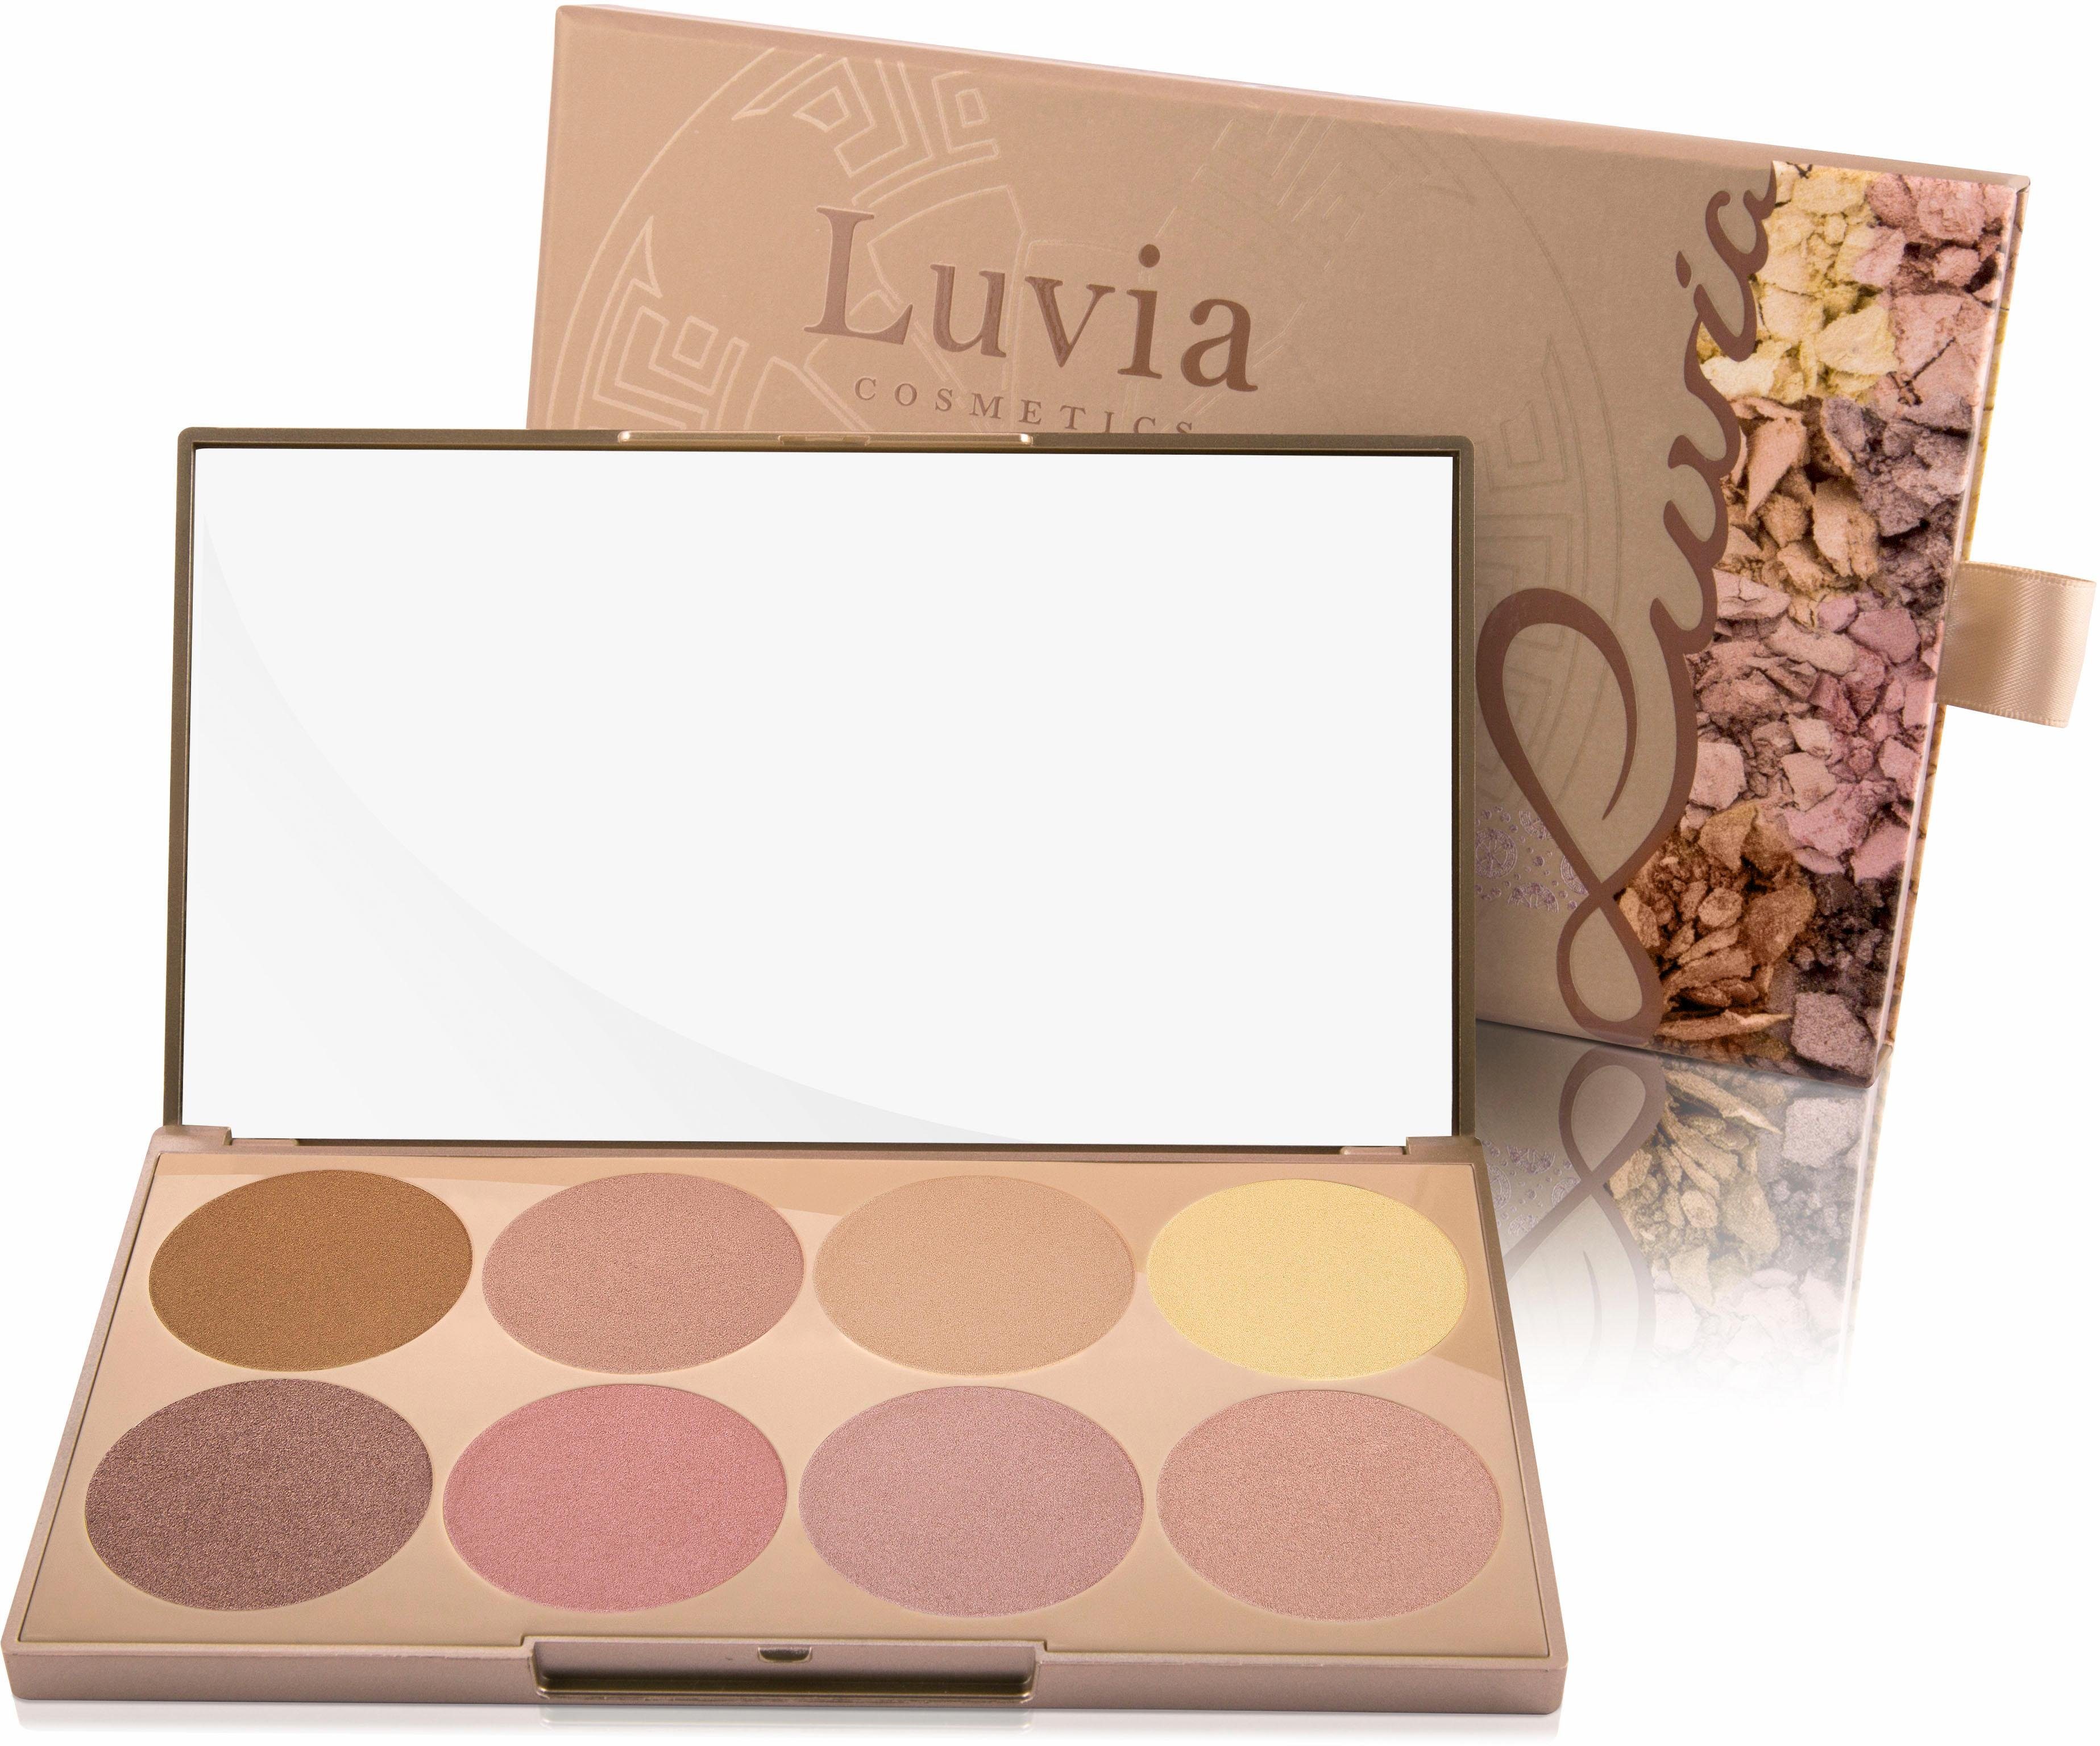 Luvia Cosmetics Highlighter-Palette Contouring Essential 8 Shades 8-tlg., - 1, Glow Vol. Prime Farben